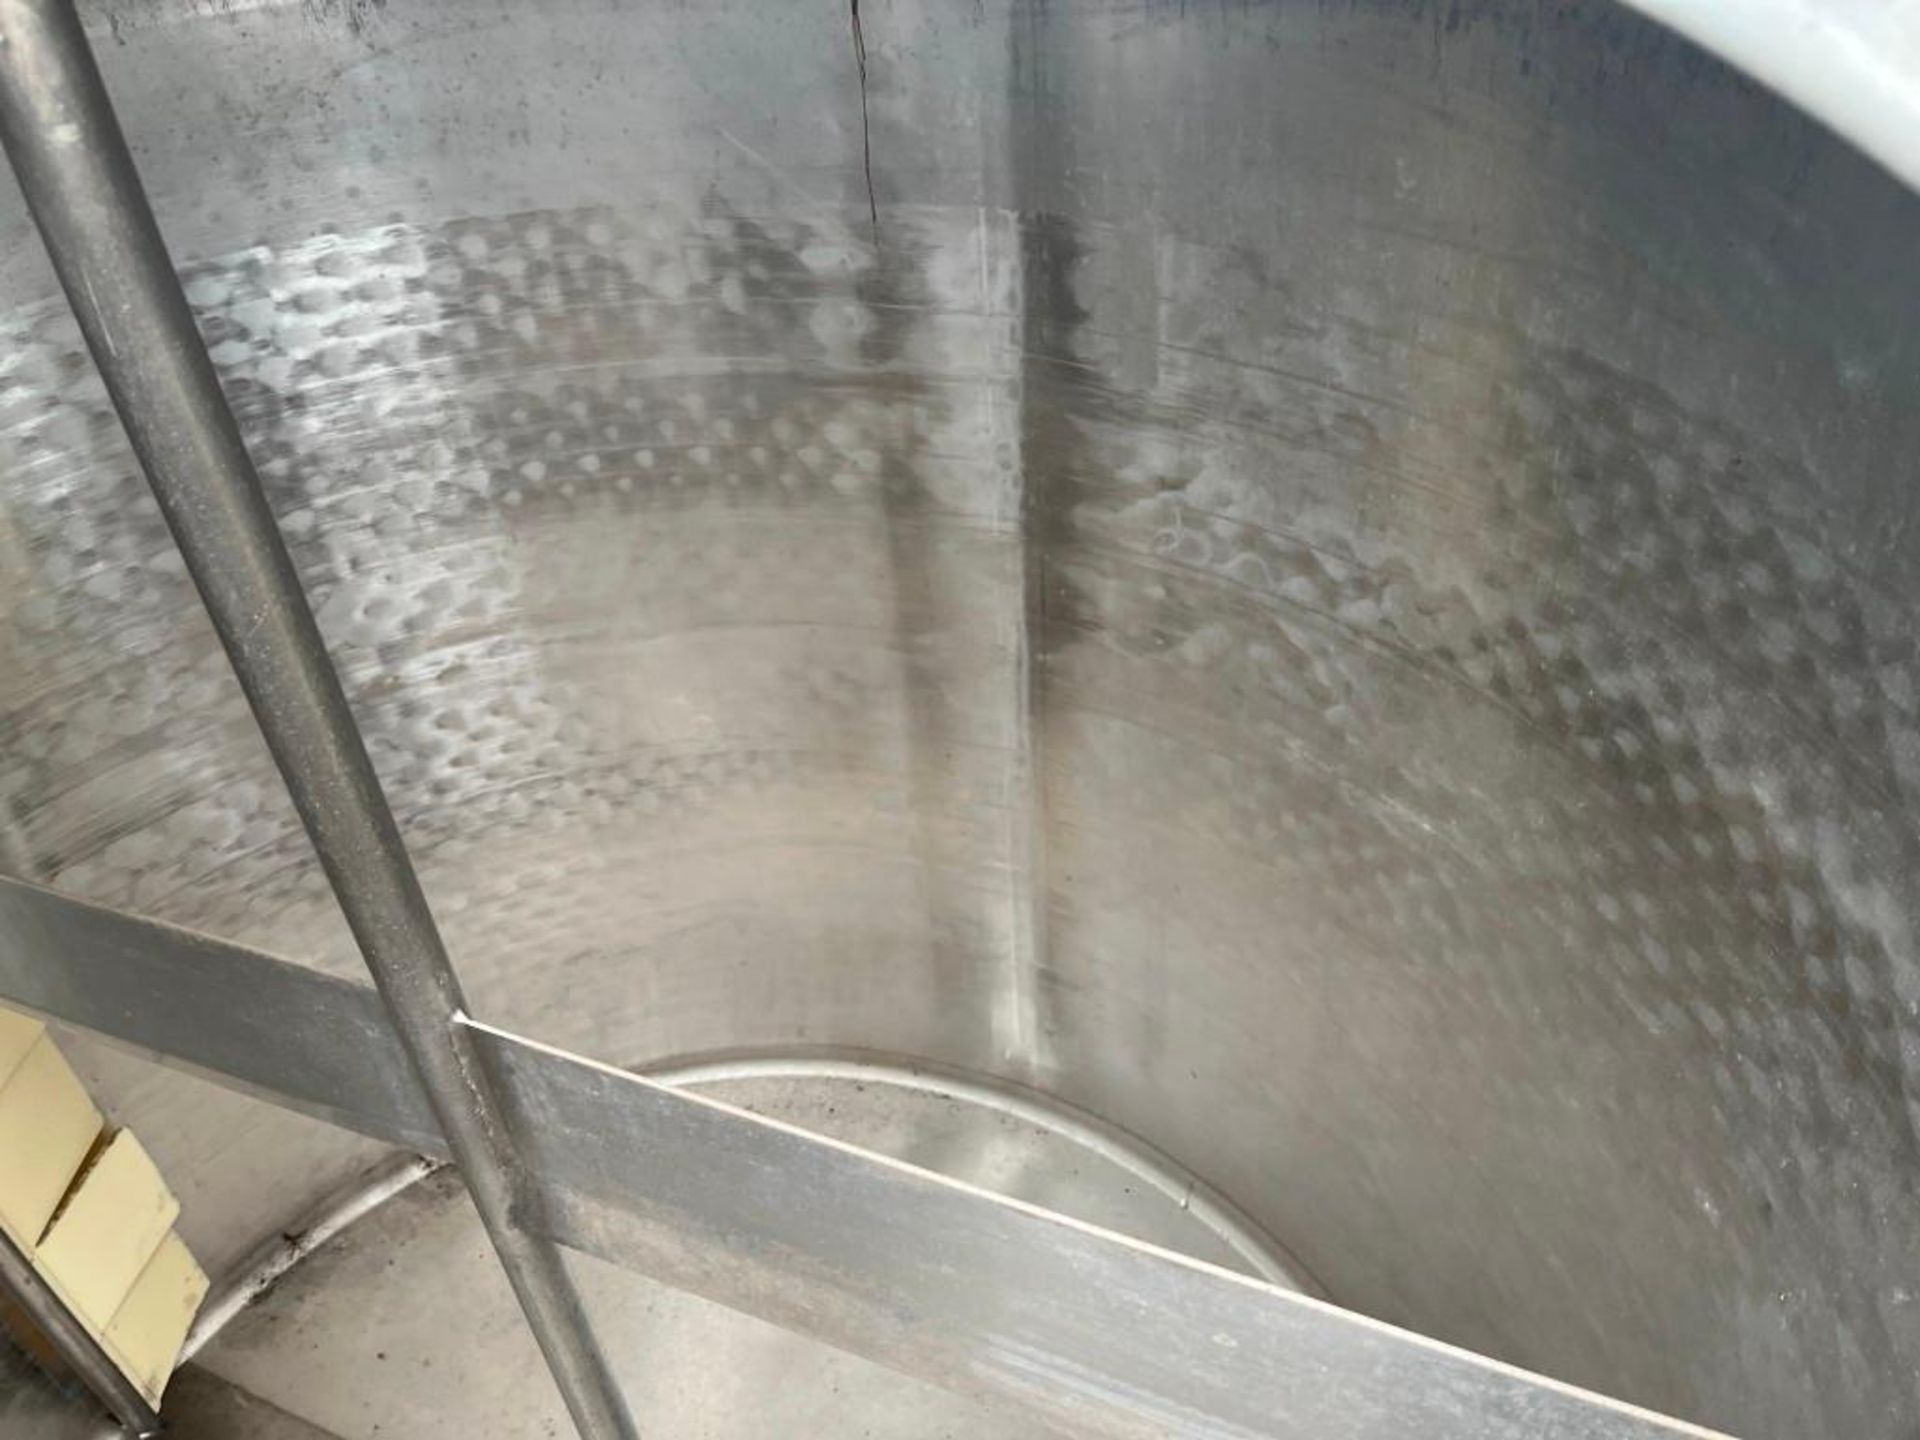 Stainless Steel Jacketed Tank. Dimpled interior. Measures (approximately) 48" (straight side) X 62" - Image 9 of 10